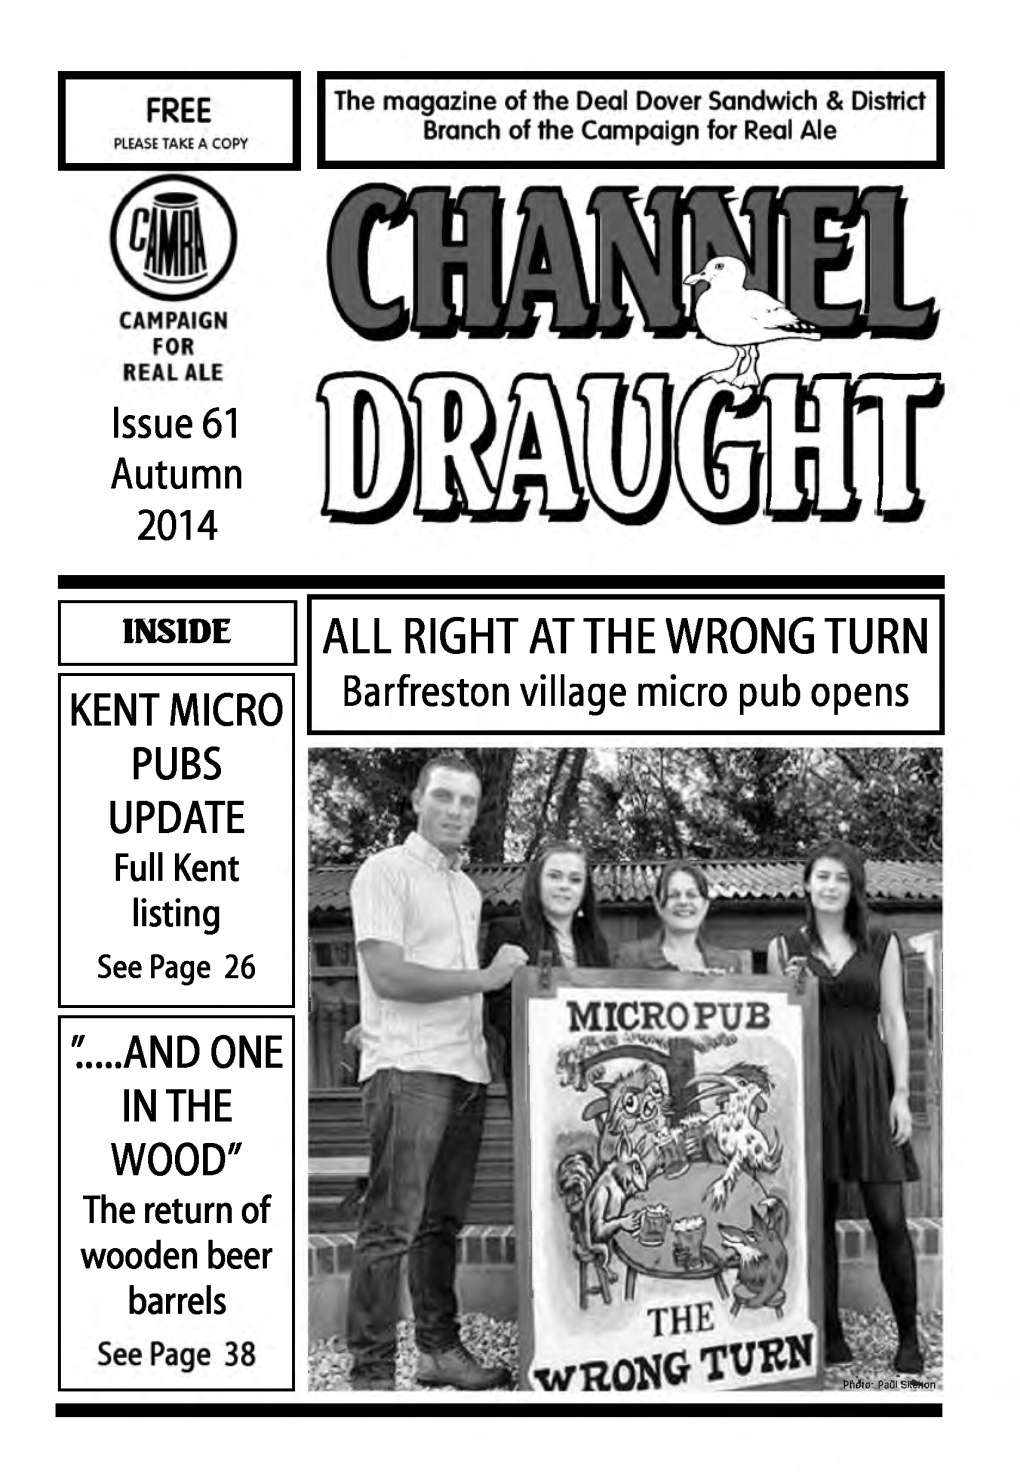 RIGHT at the WRONG TURN Barfreston Village Micro Pub Opens KENT MICRO PUBS UPDATE Full Kent Listing See Page 26